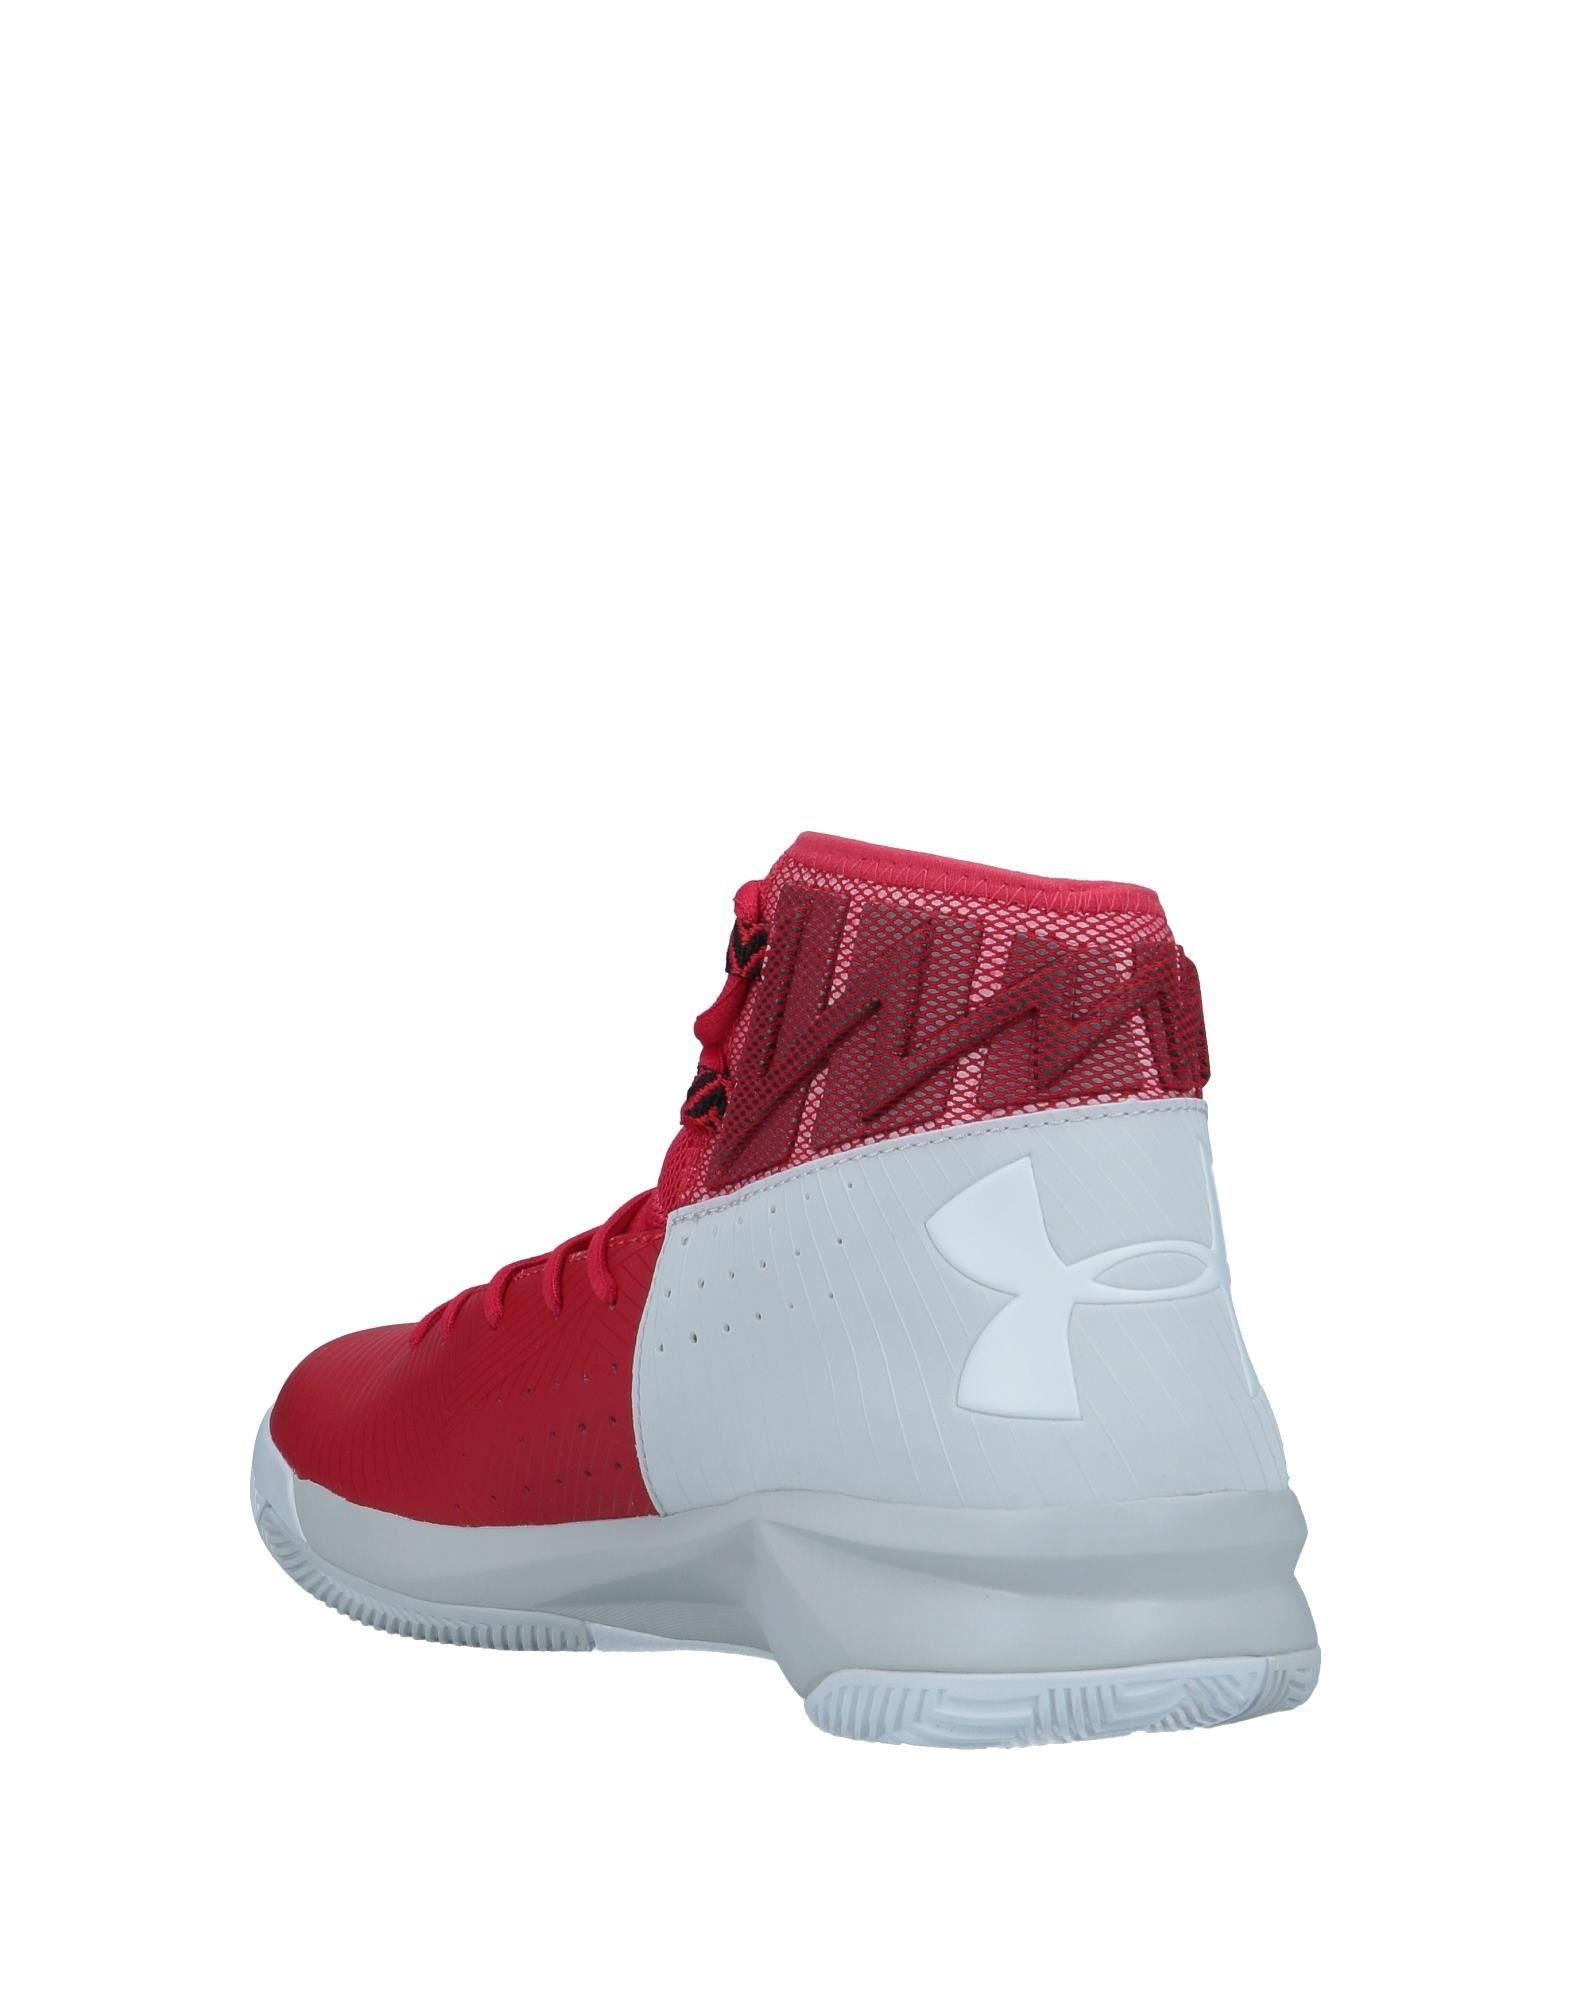 under armour red high tops